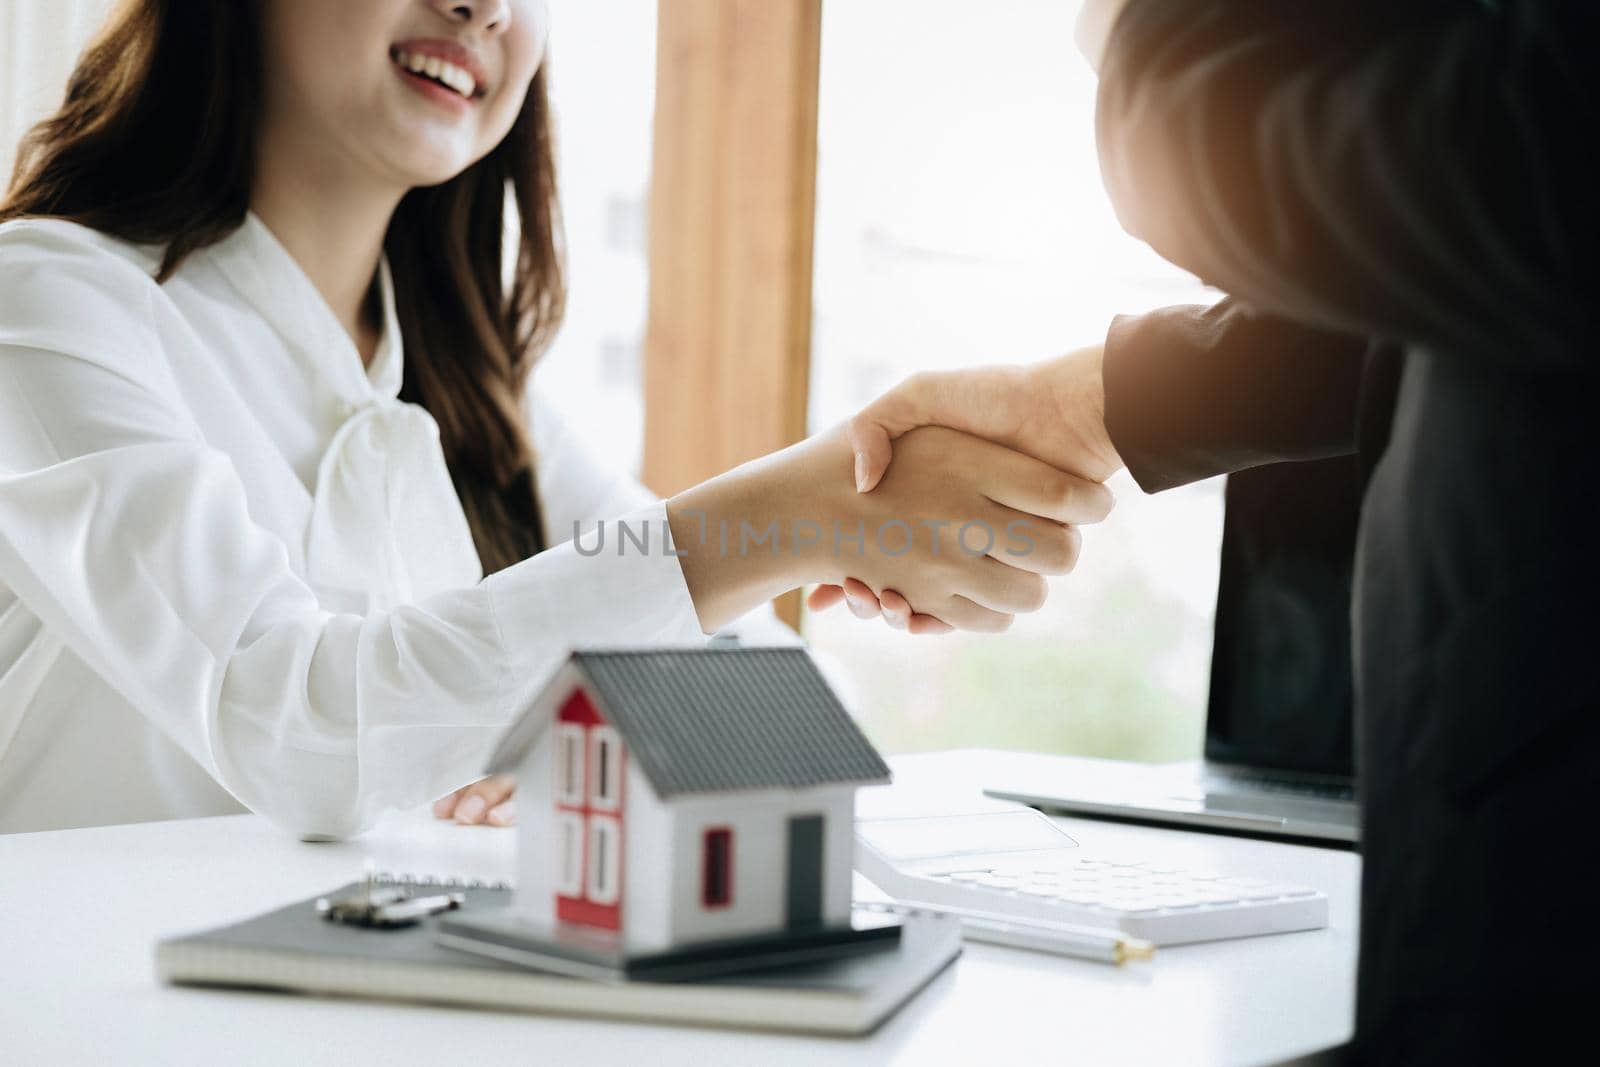 Guarantees, Mortgages, Signings, Insurance, contract, agreement concept, Real Estate Agents are shaking hands with customers to congratulate them after landing a deal.